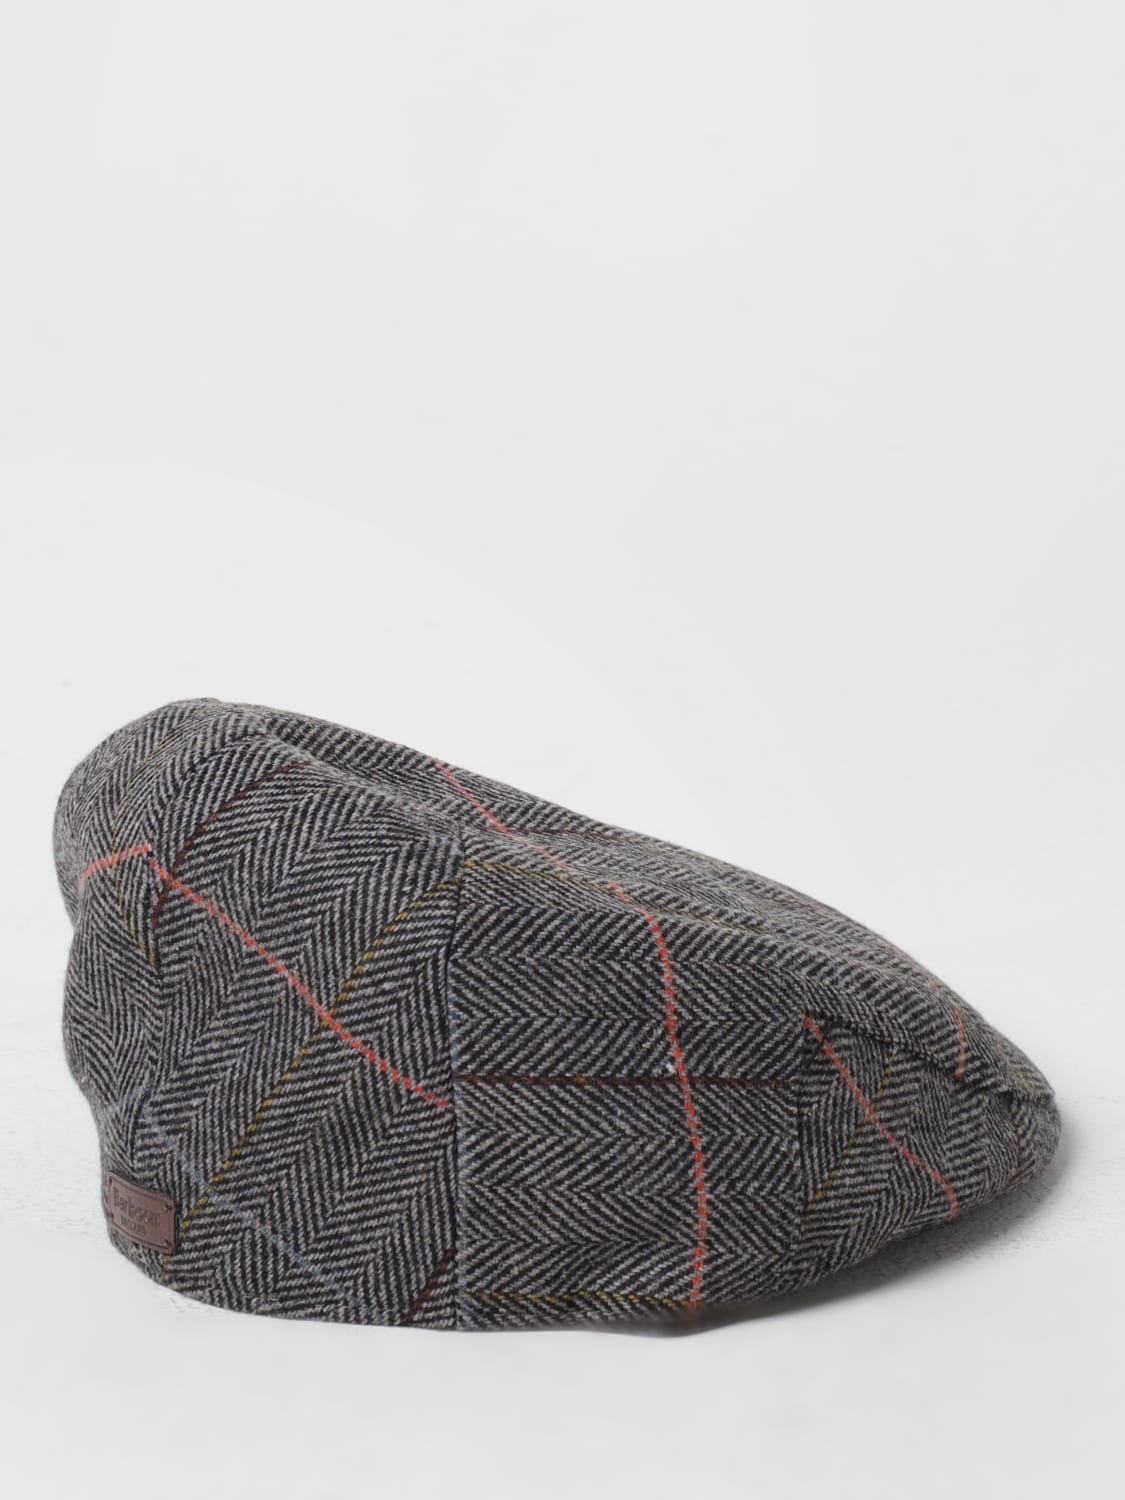 BARBOUR: hat for man - Grey | Barbour hat MHA0665MHA online at GIGLIO.COM